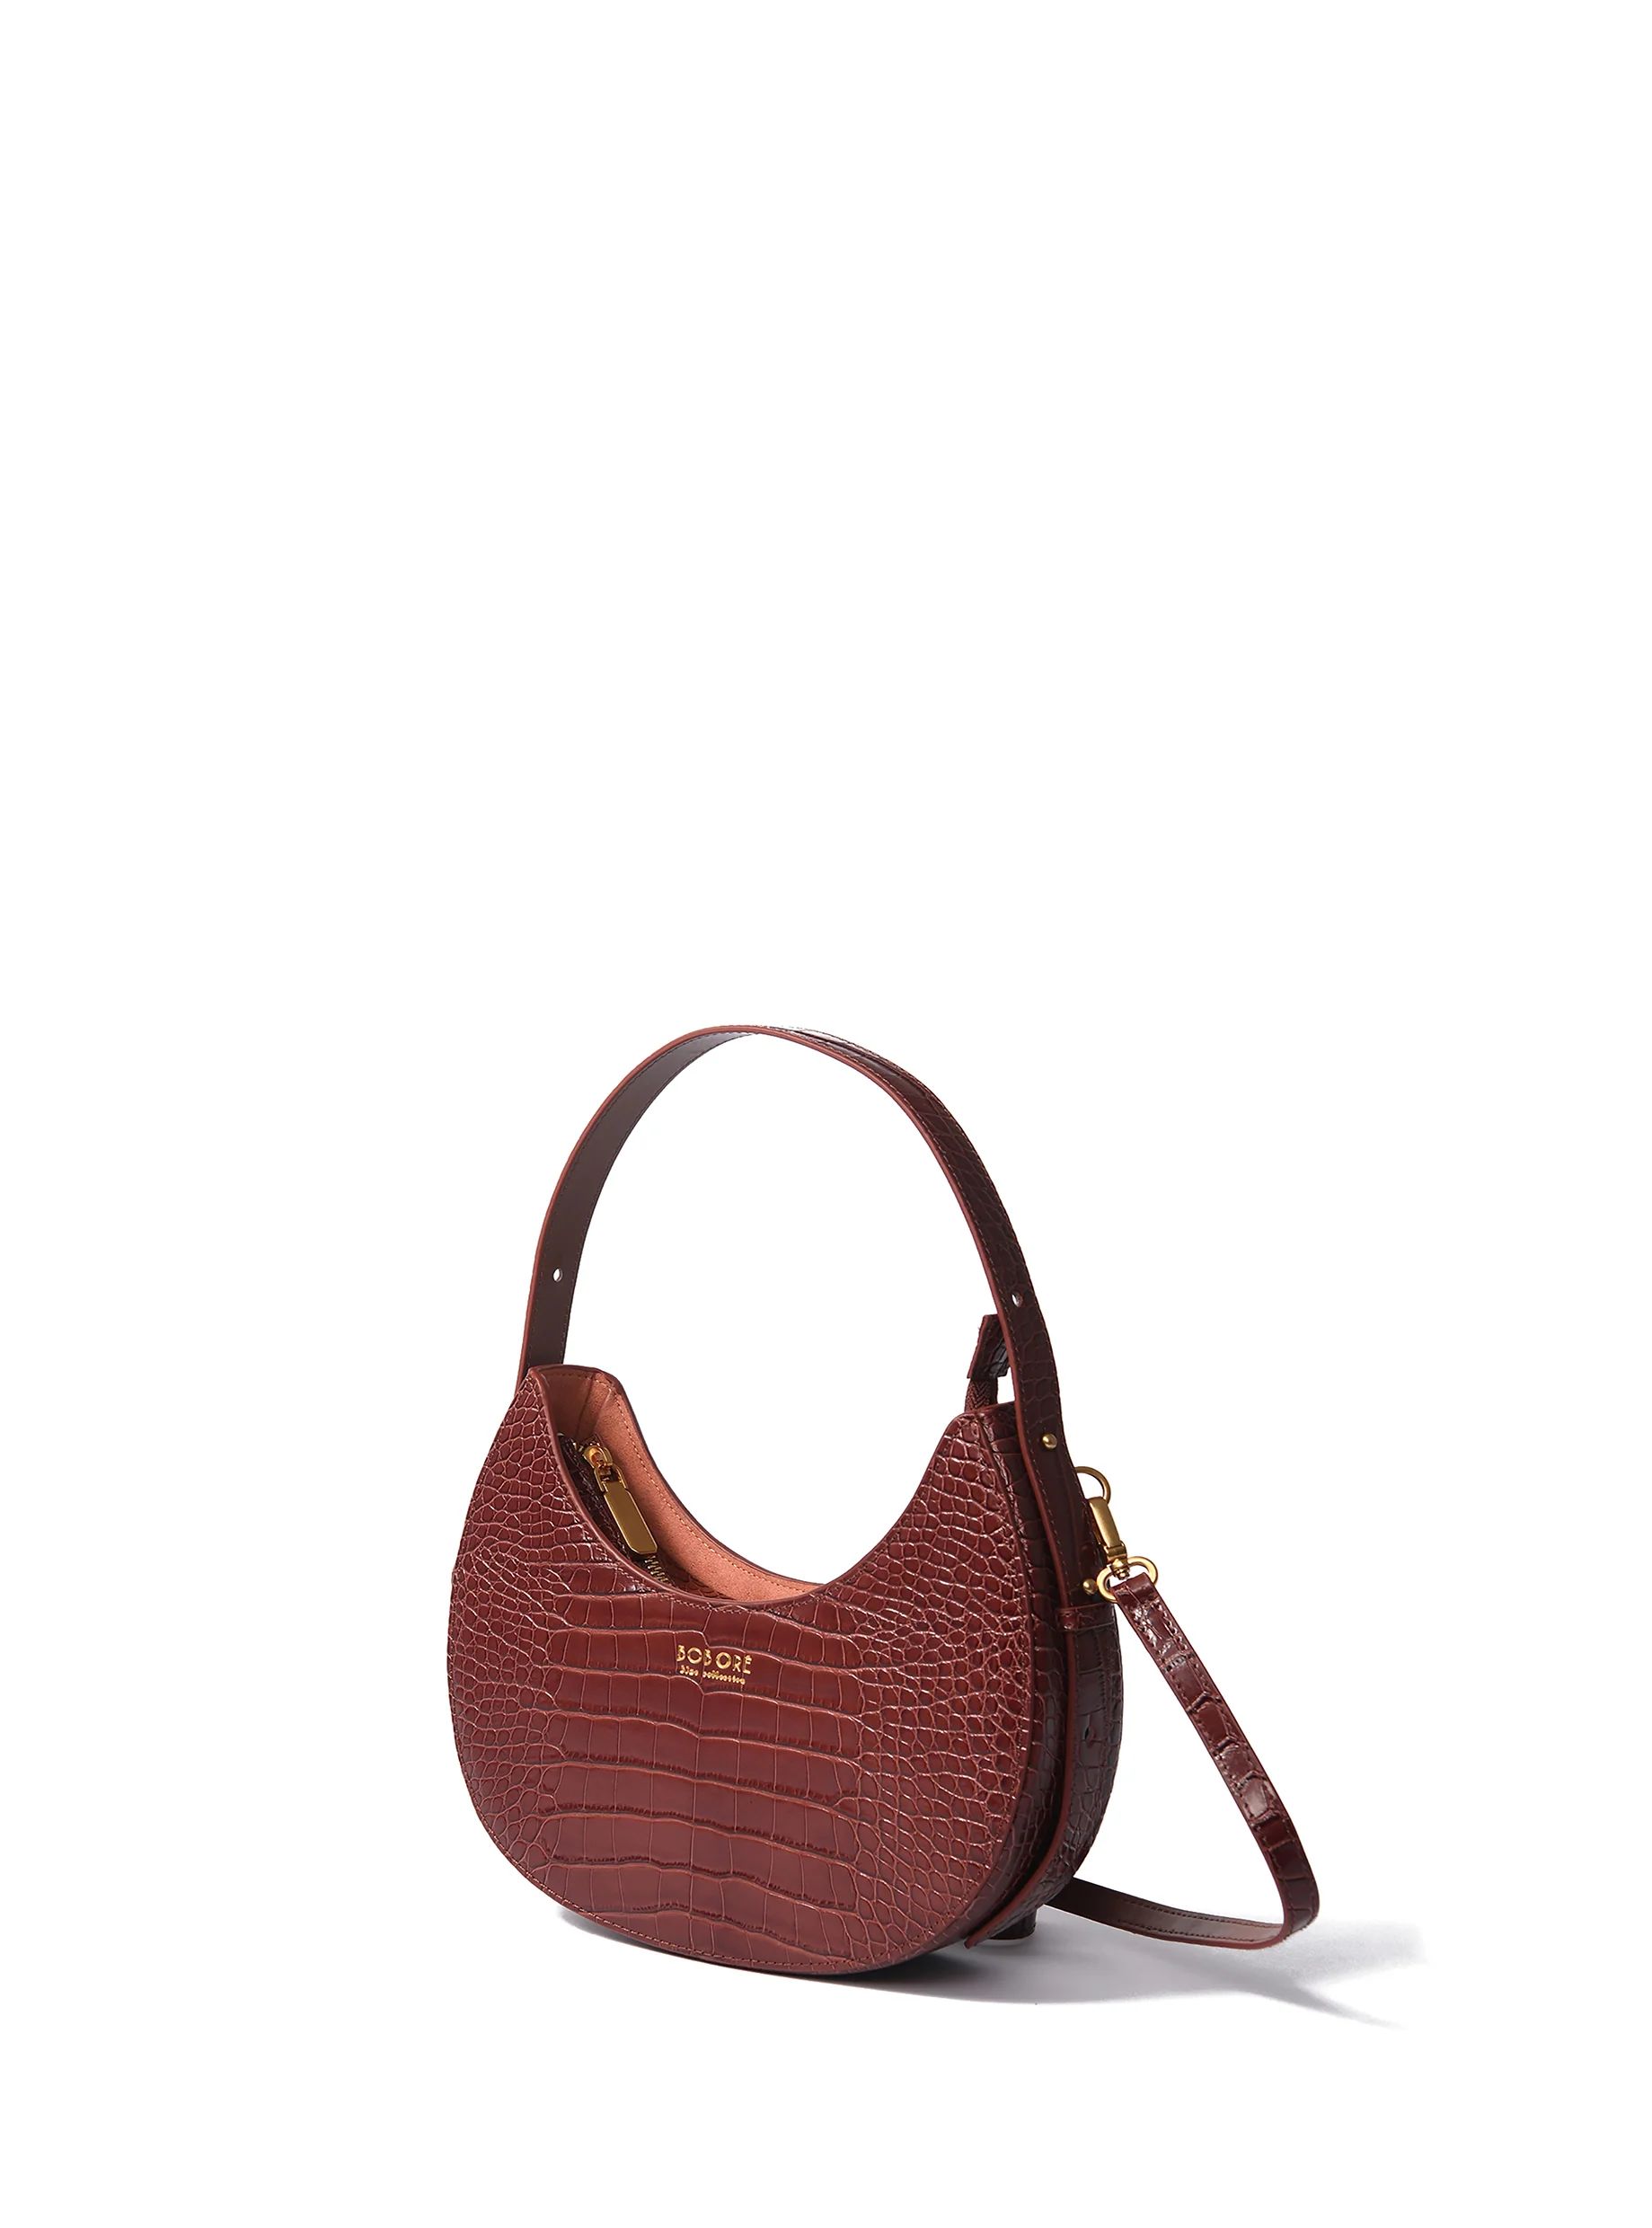 Naomi Leather Moon Bag with Croc-Embossed Pattern, Caramel | Bob Ore Blue Collection